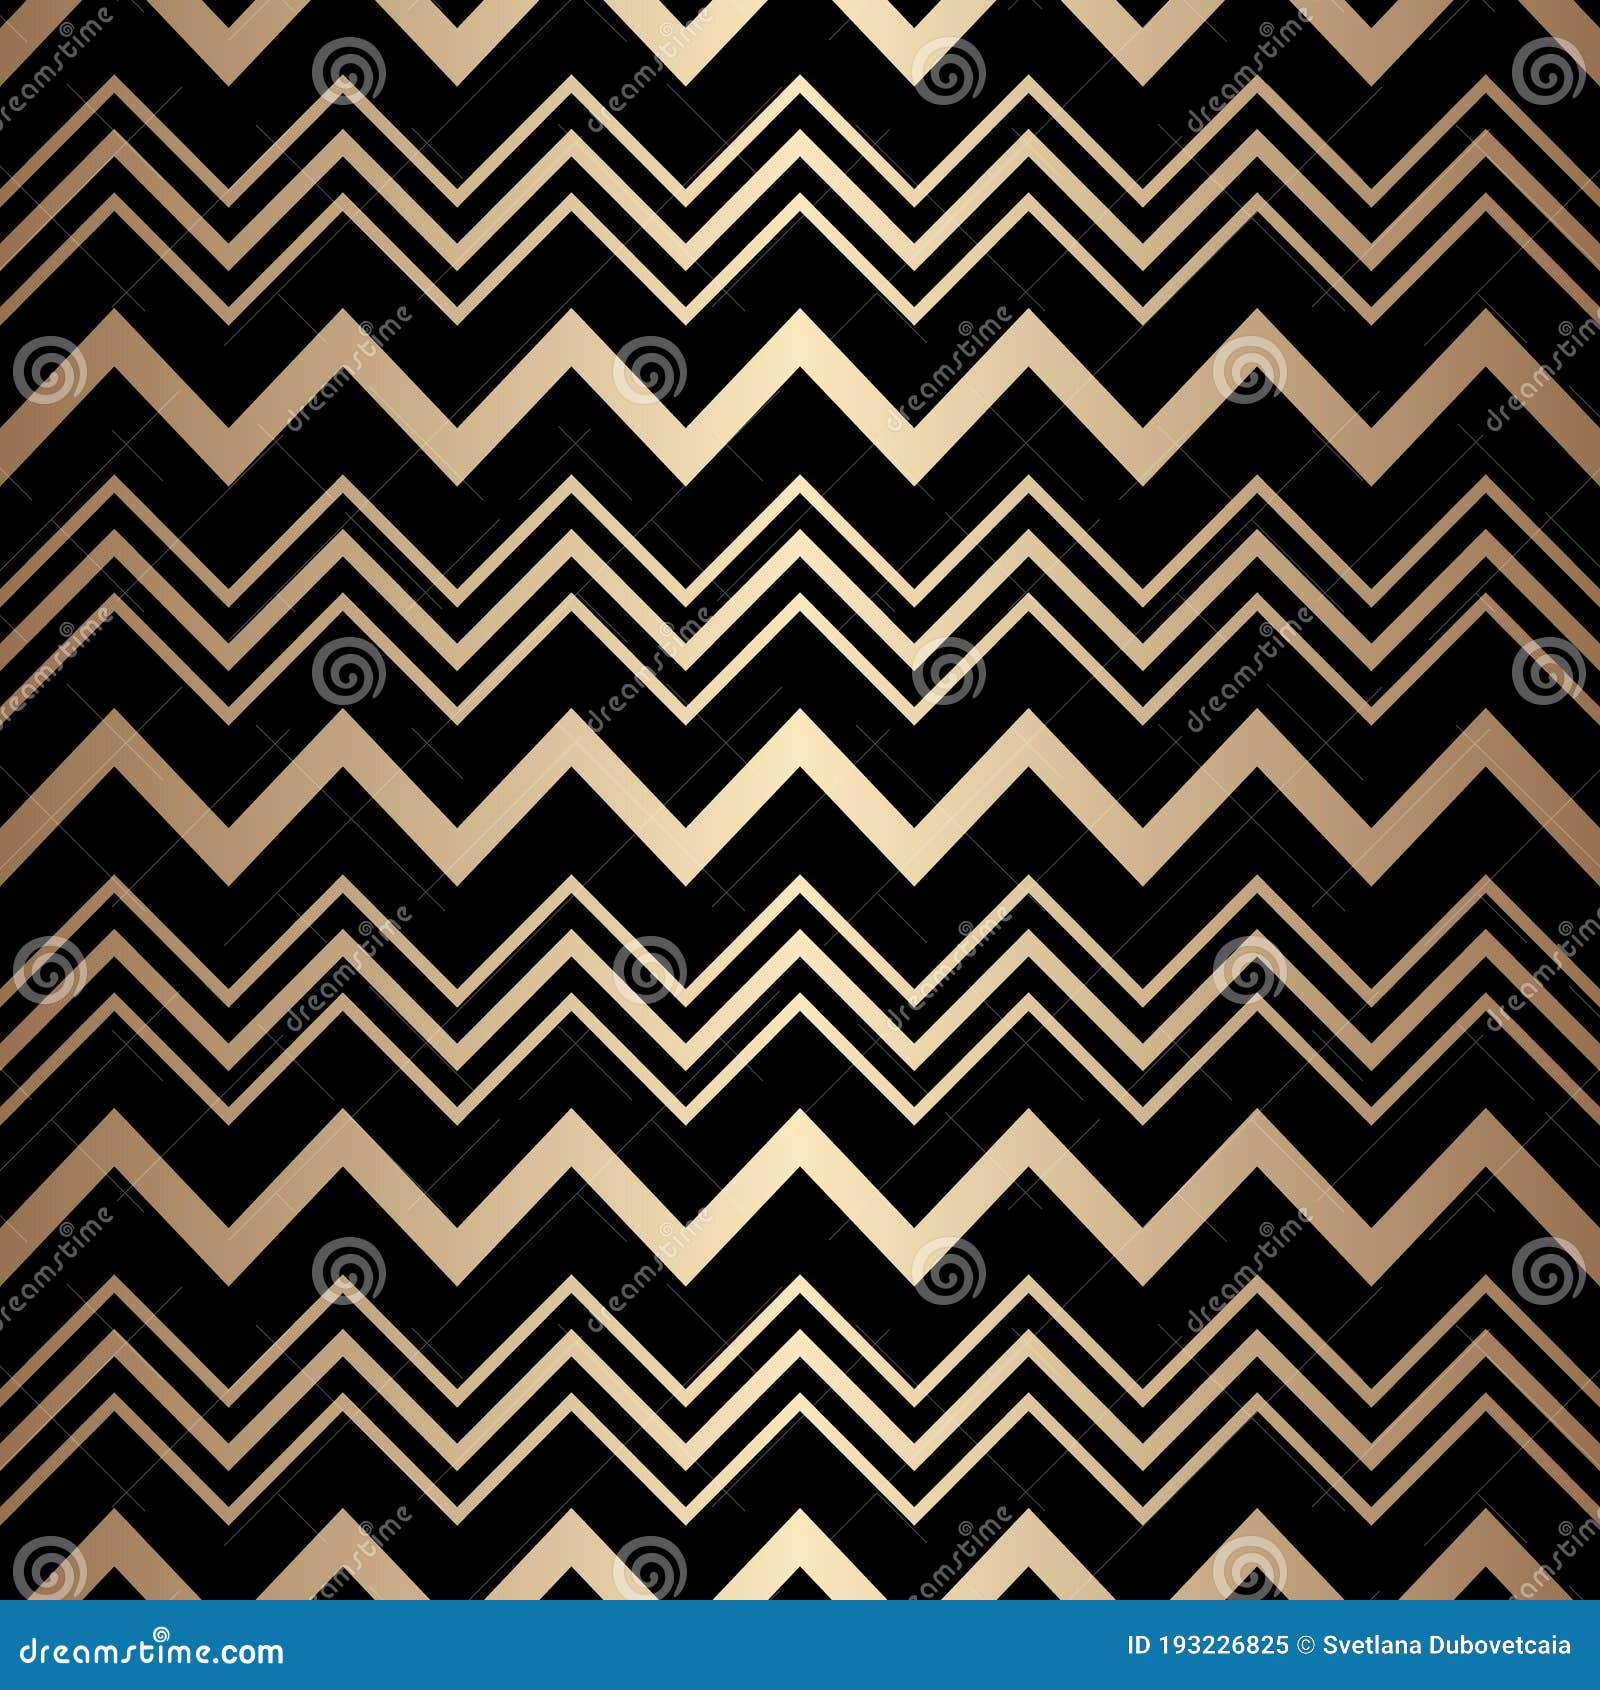 gold seamless pattern. background stripe chevron. elegant zigzag lines. repeating delicate chevrons striped texture for . te